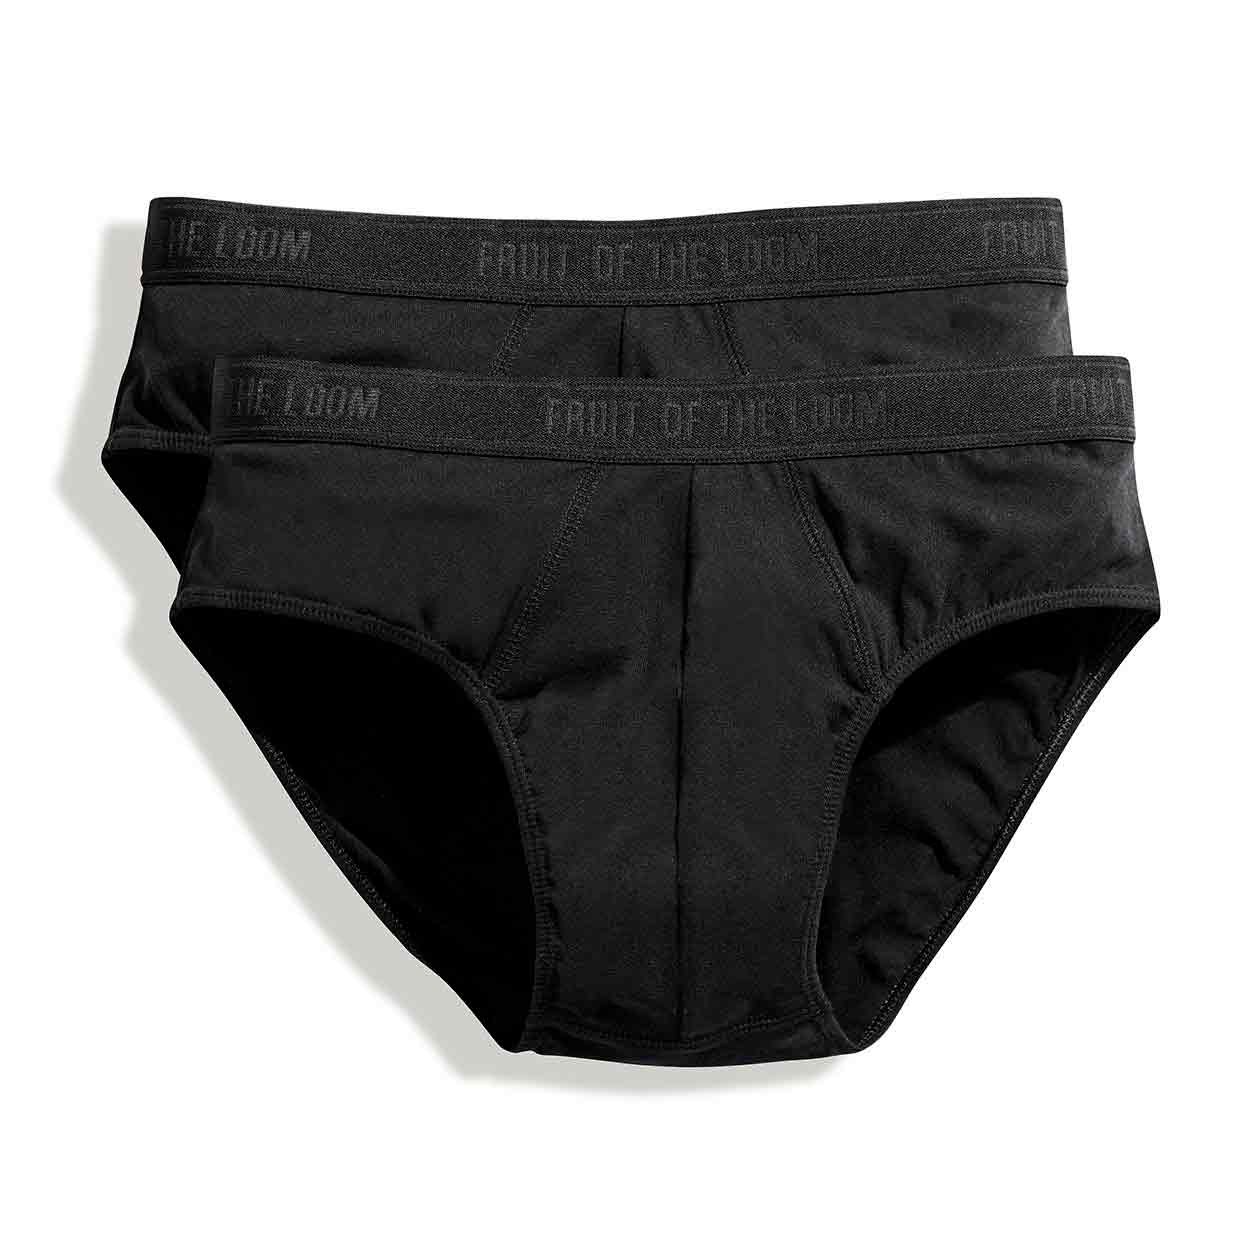 Fruit of the Loom SS302 Classic Sport Brief - Underwear